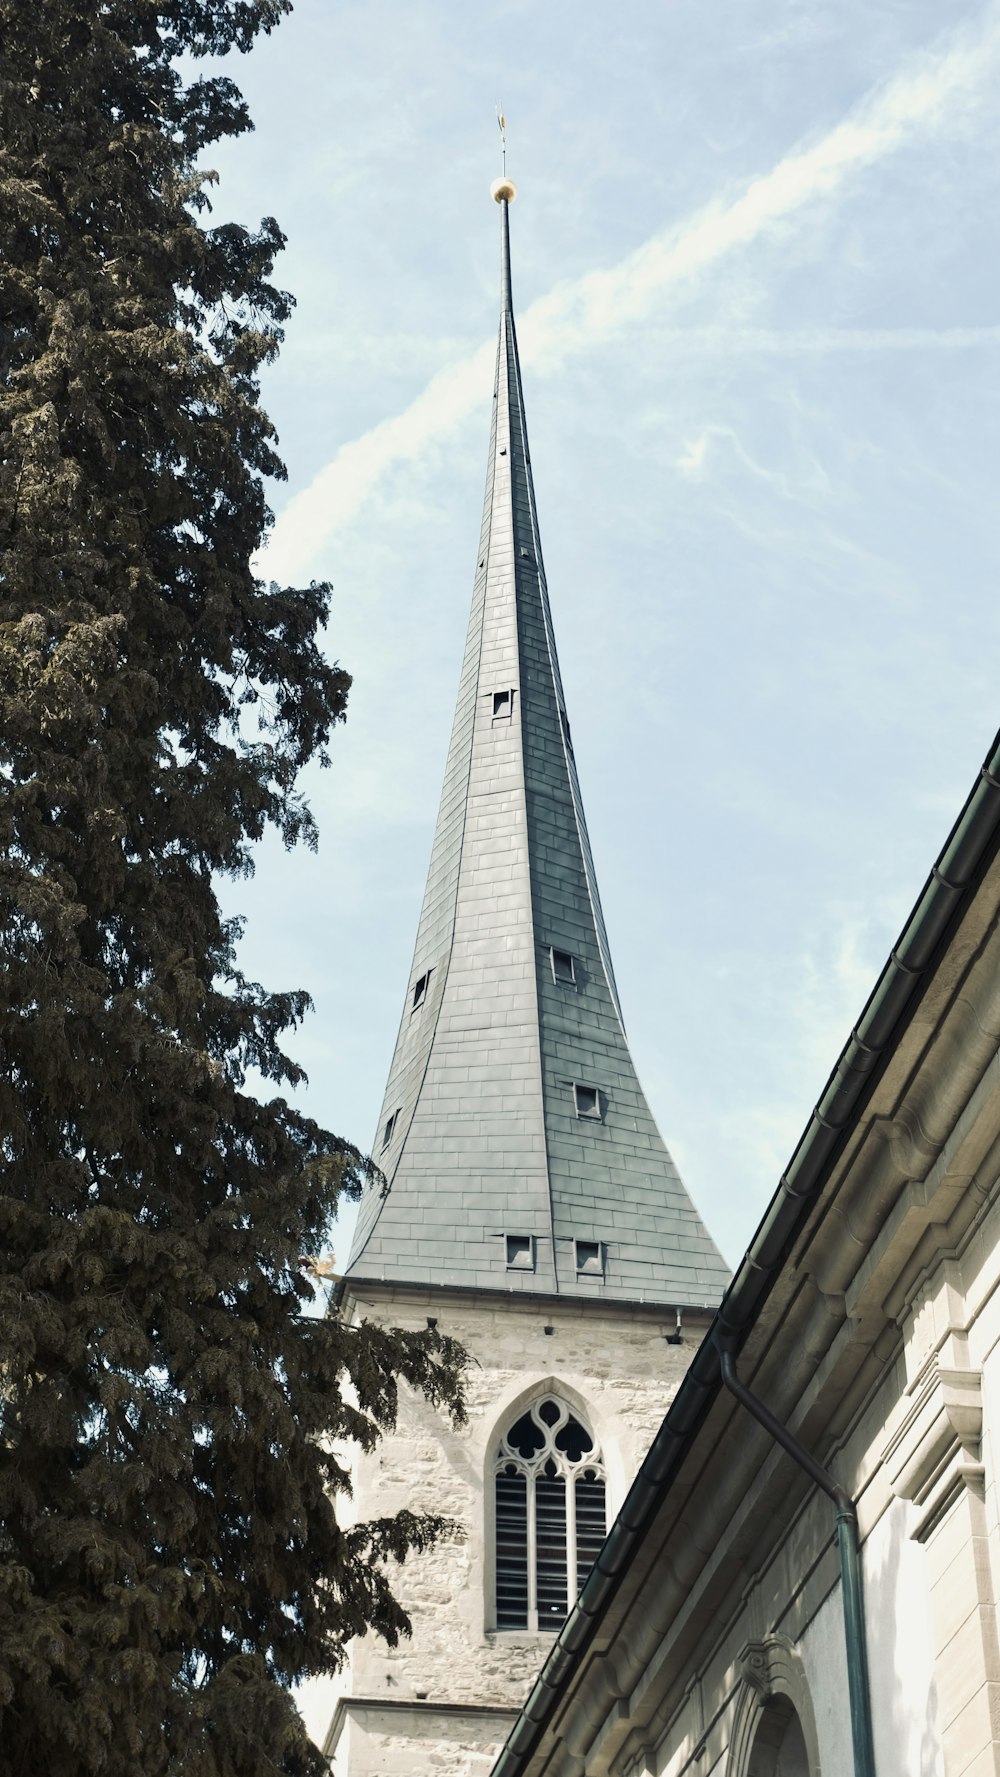 a steeple of a church with a clock on it